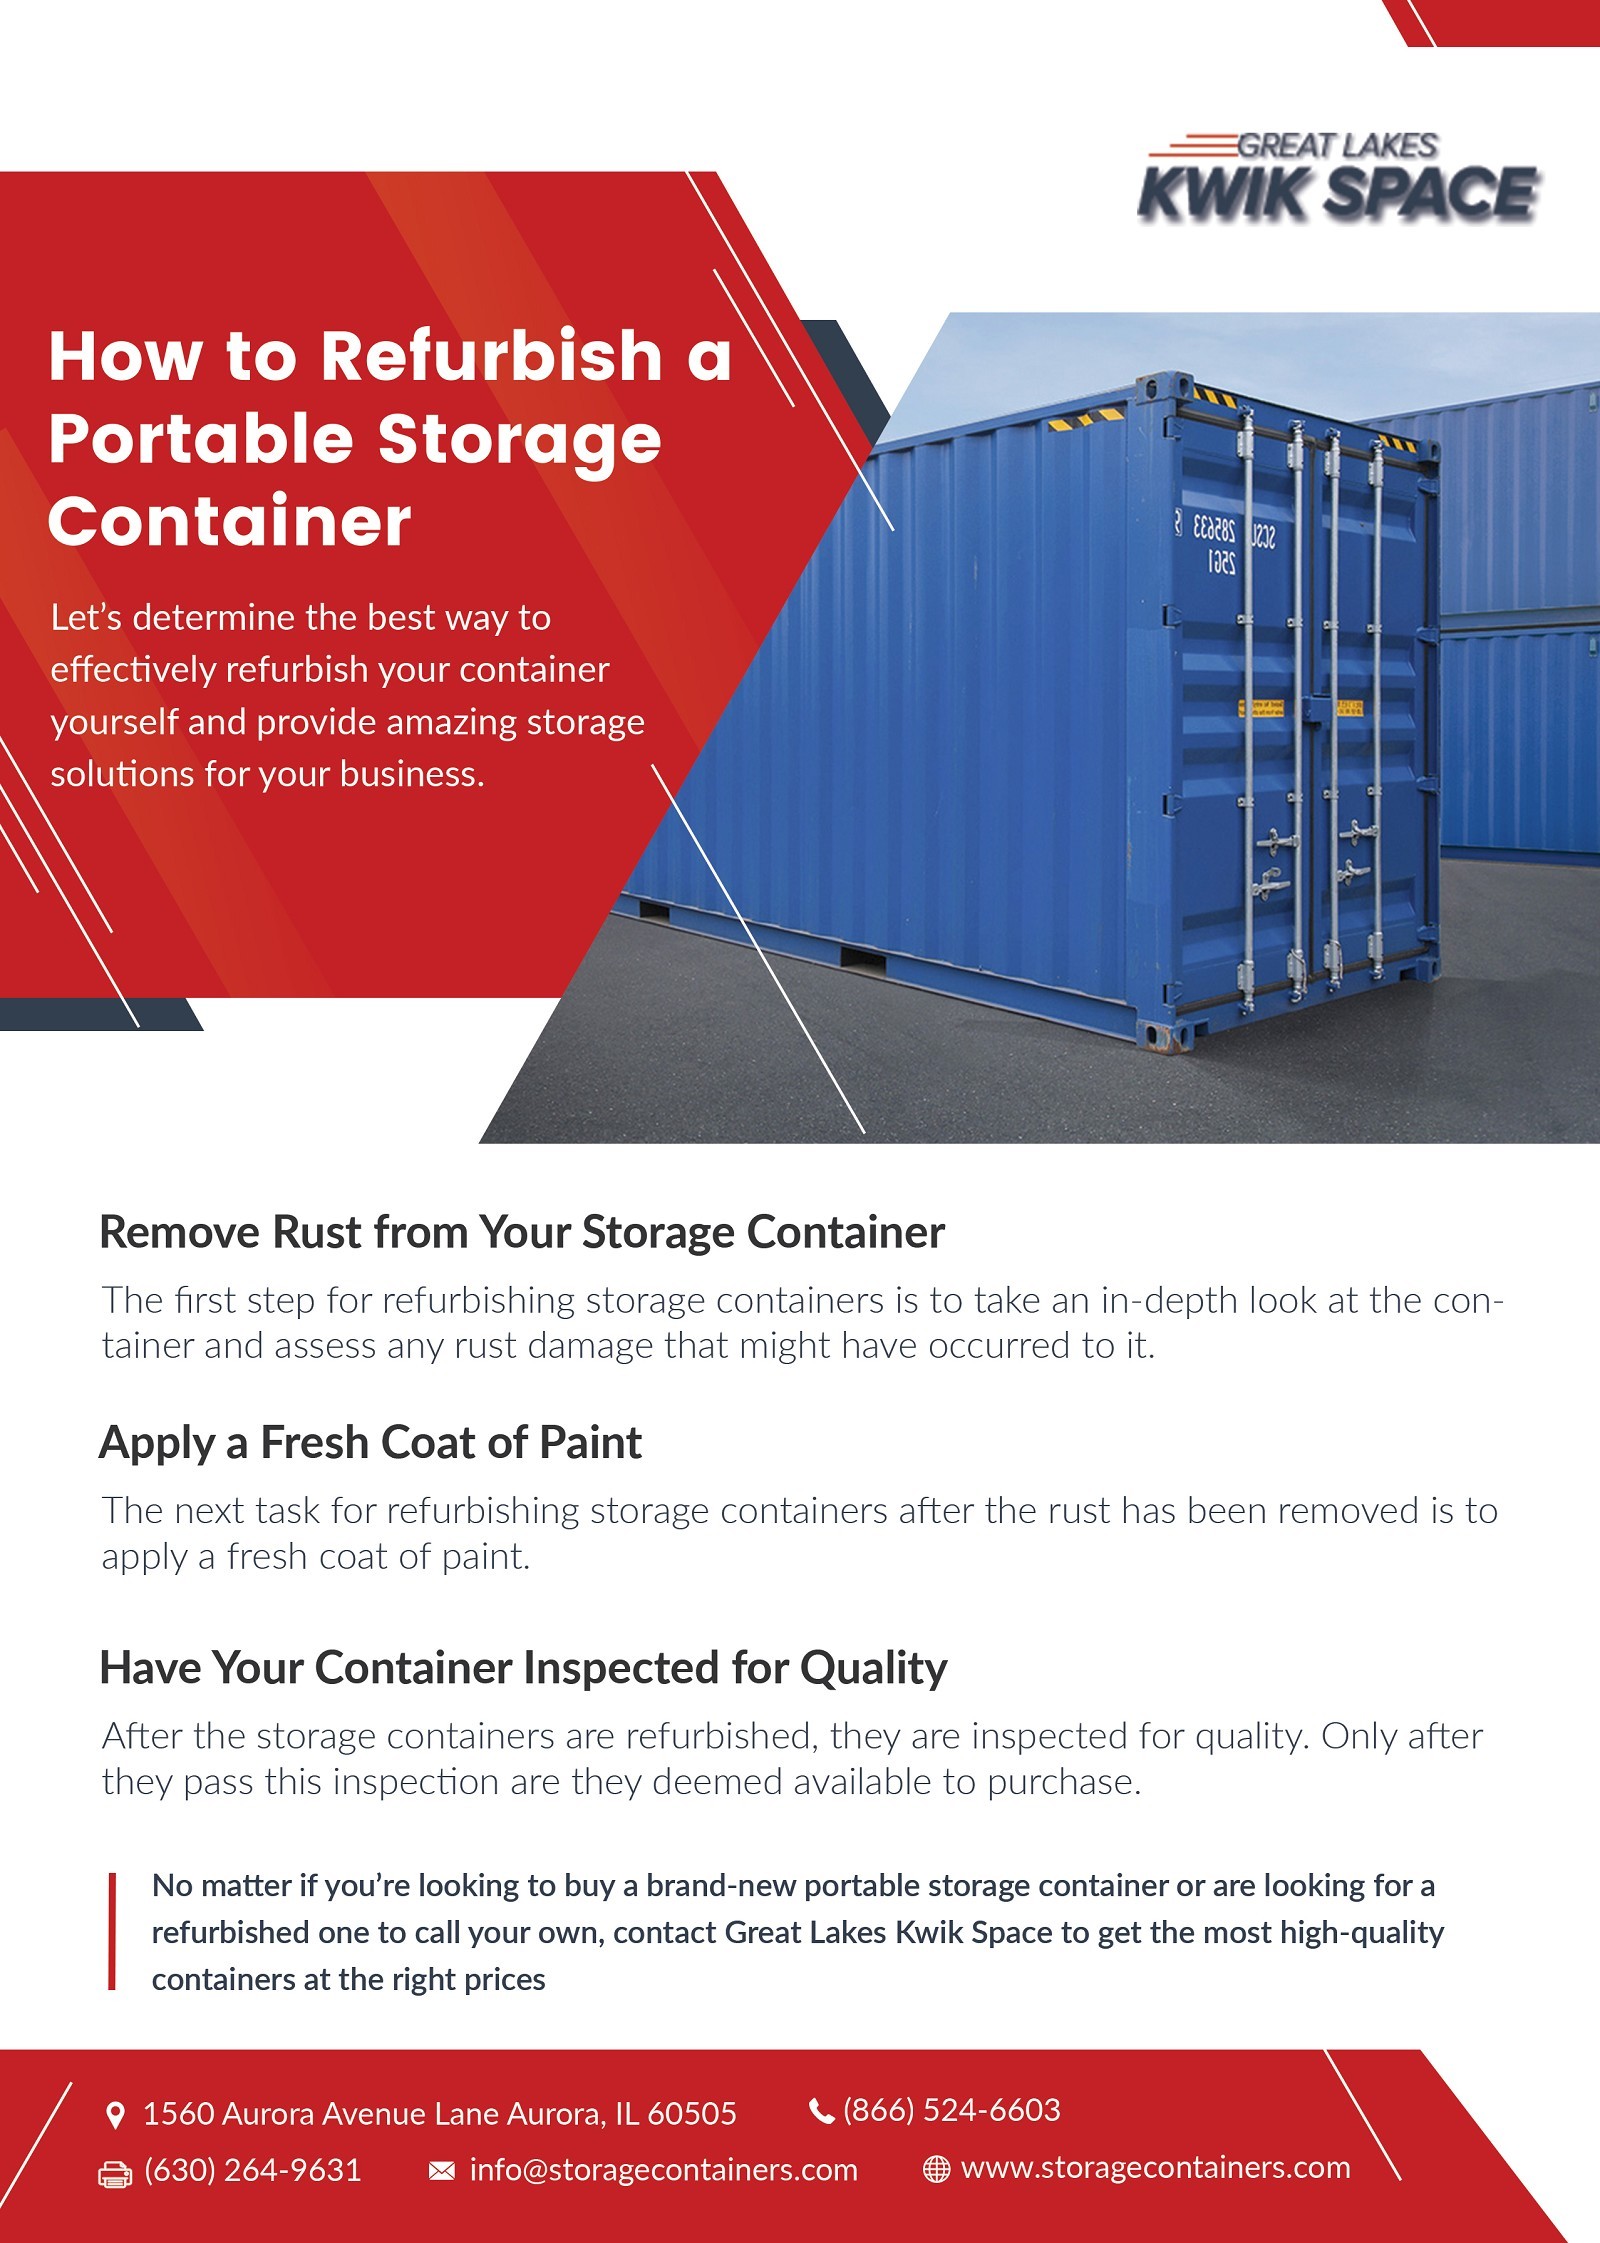 How to Refurbish a Portable Storage Container